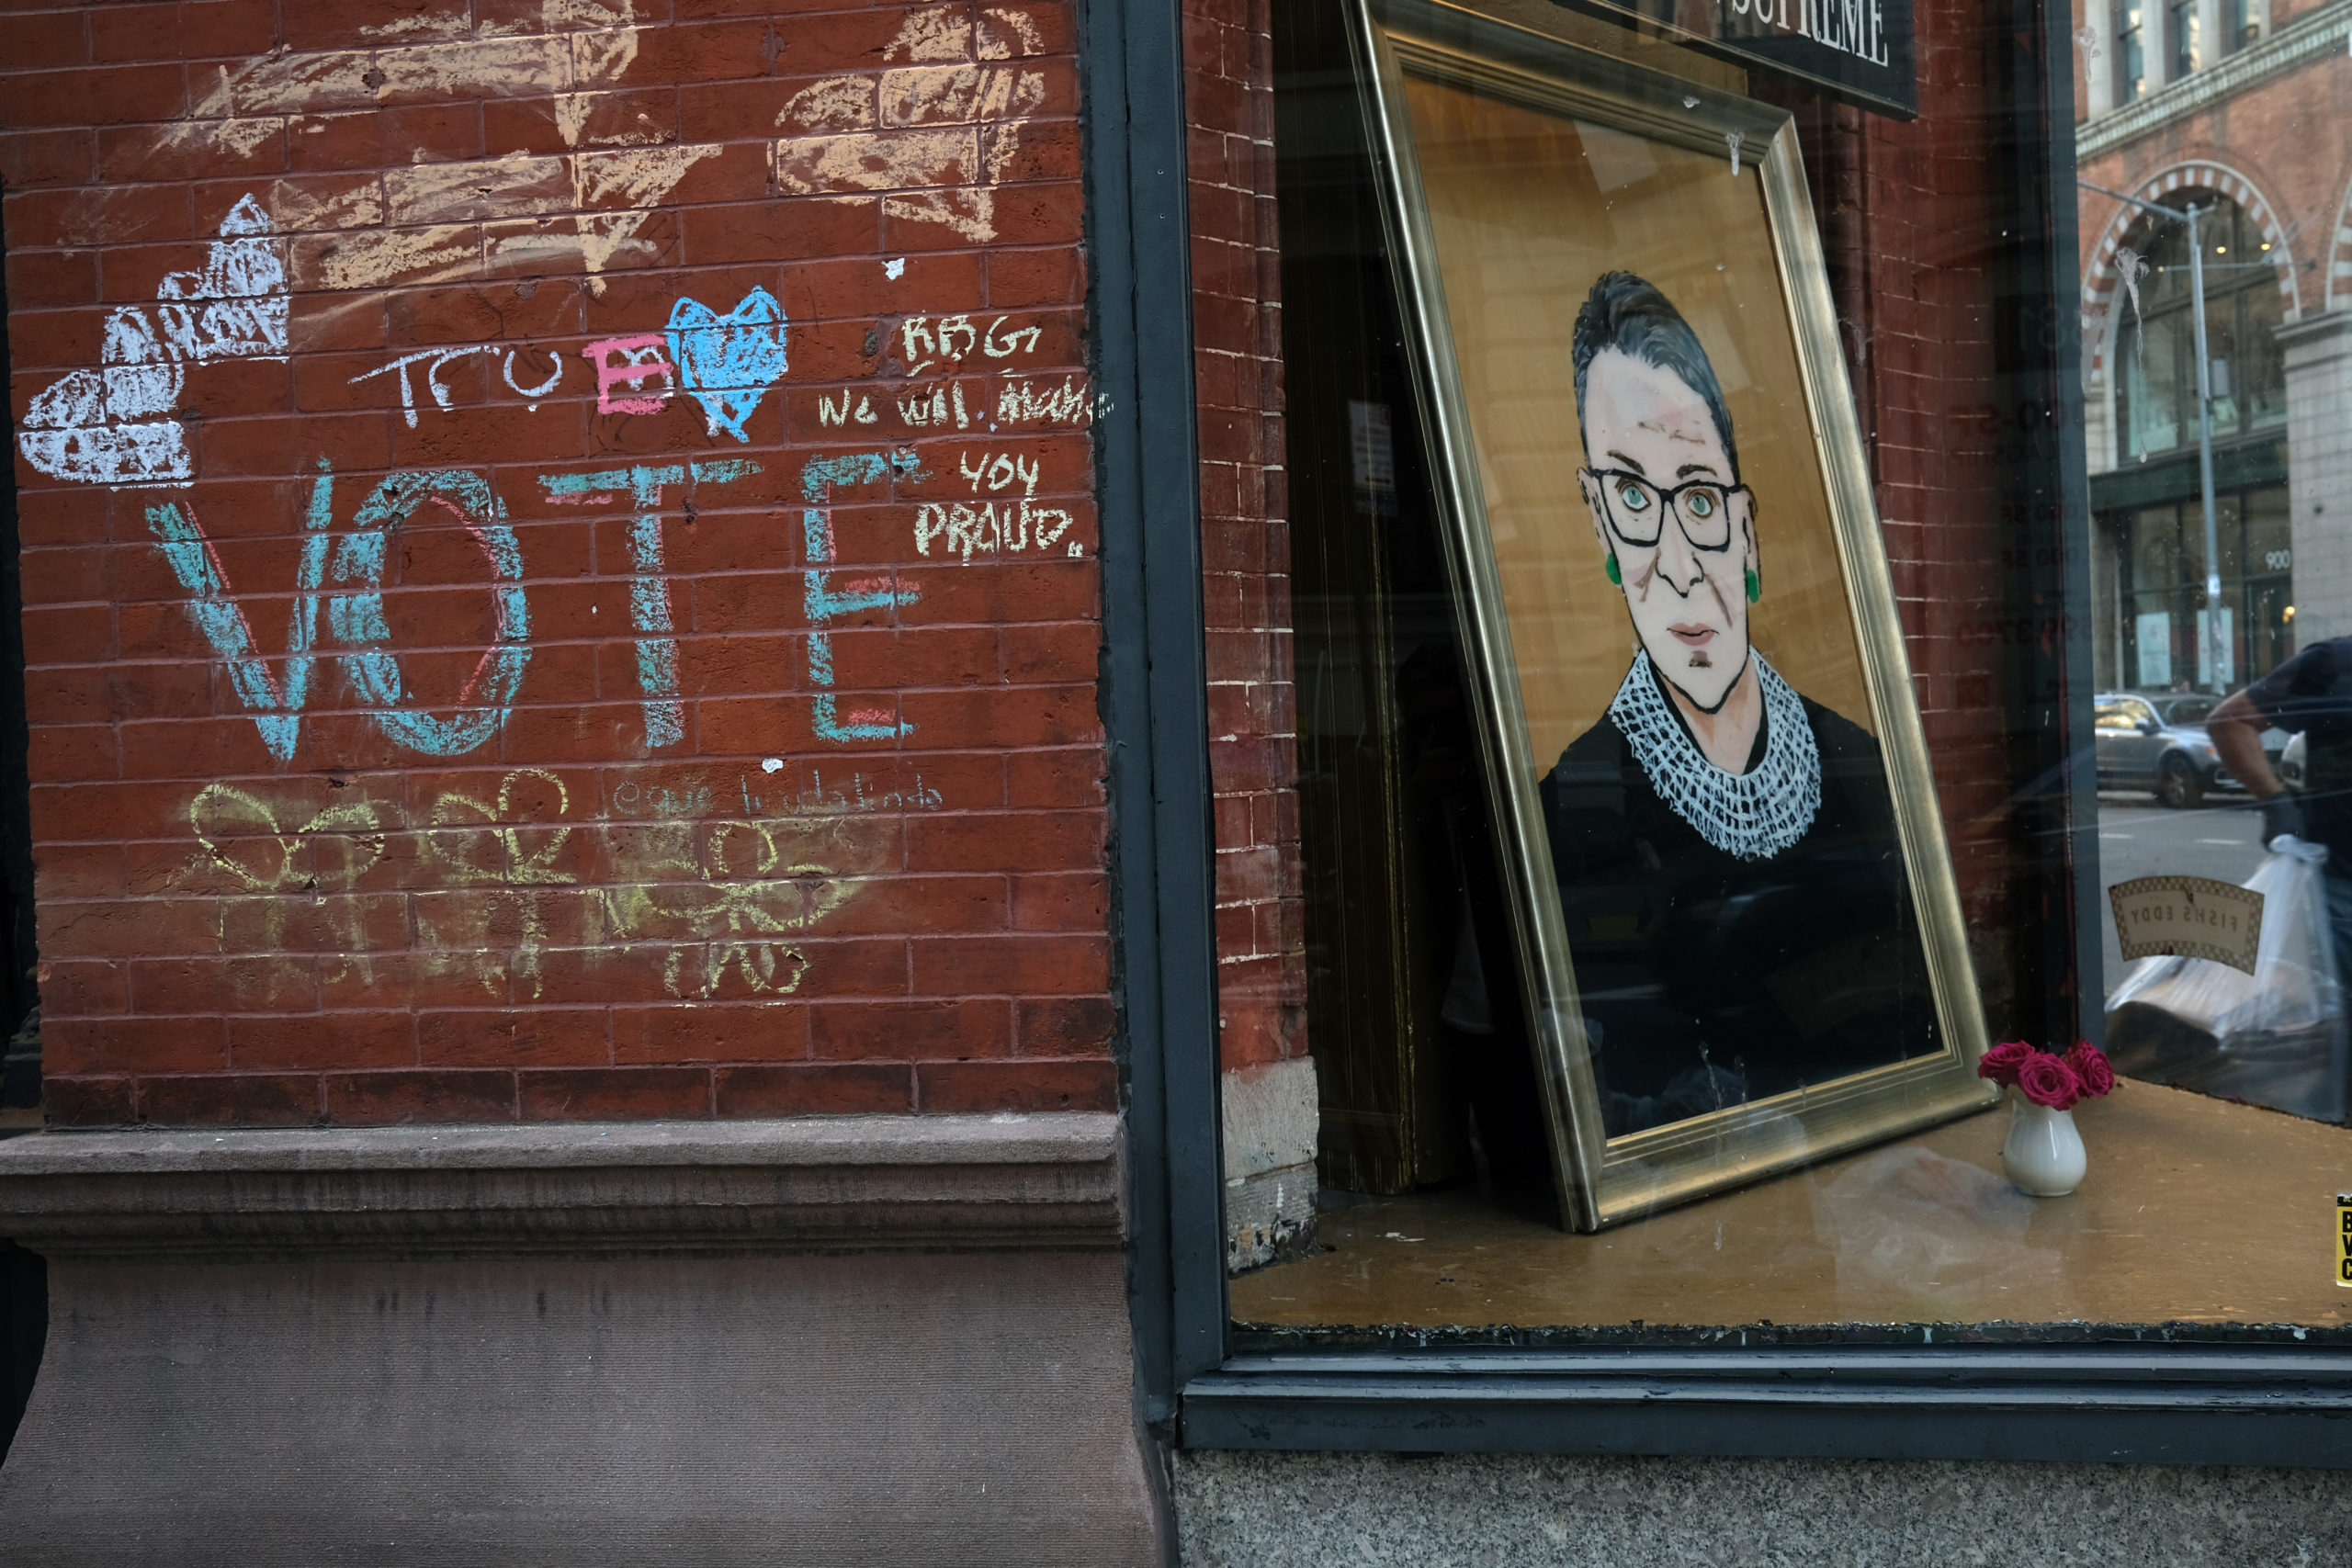 A painting of the late Supreme Court Justice Ruth Bader Ginsburg is displayed in a shop window on September 21, 2020 in New York City. Ginsburg, who in her 80s became a legal, cultural and feminist icon, died at her home in Washington, D.C. after serving on the high court since 1993. (Photo by Spencer Platt/Getty Images)